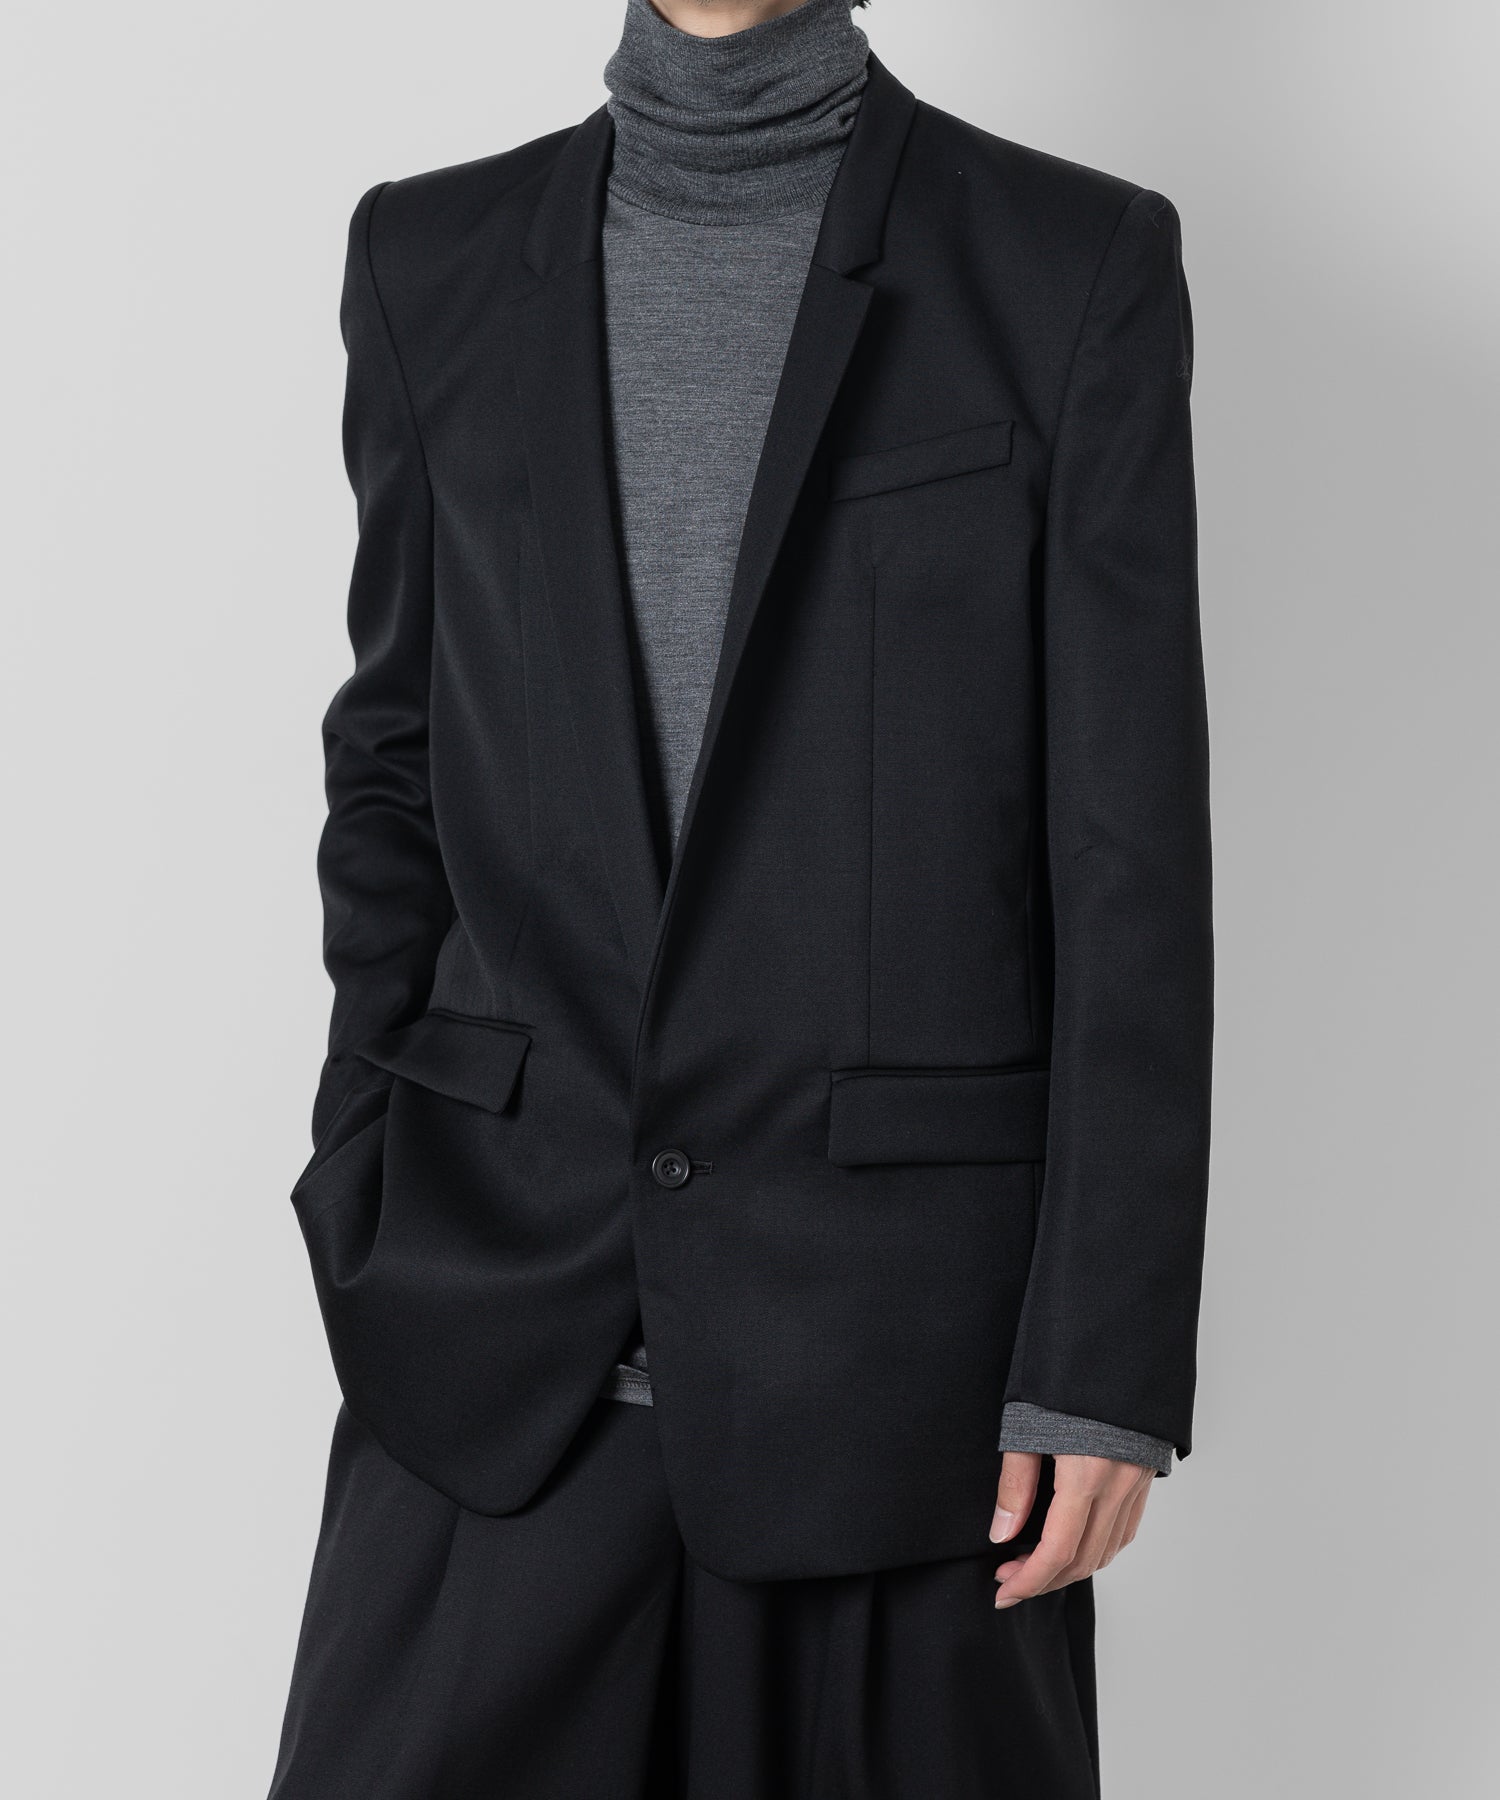 ato】WOOL TWILL 1B JACKET - BLACK | 公式通販サイト session(セッション)